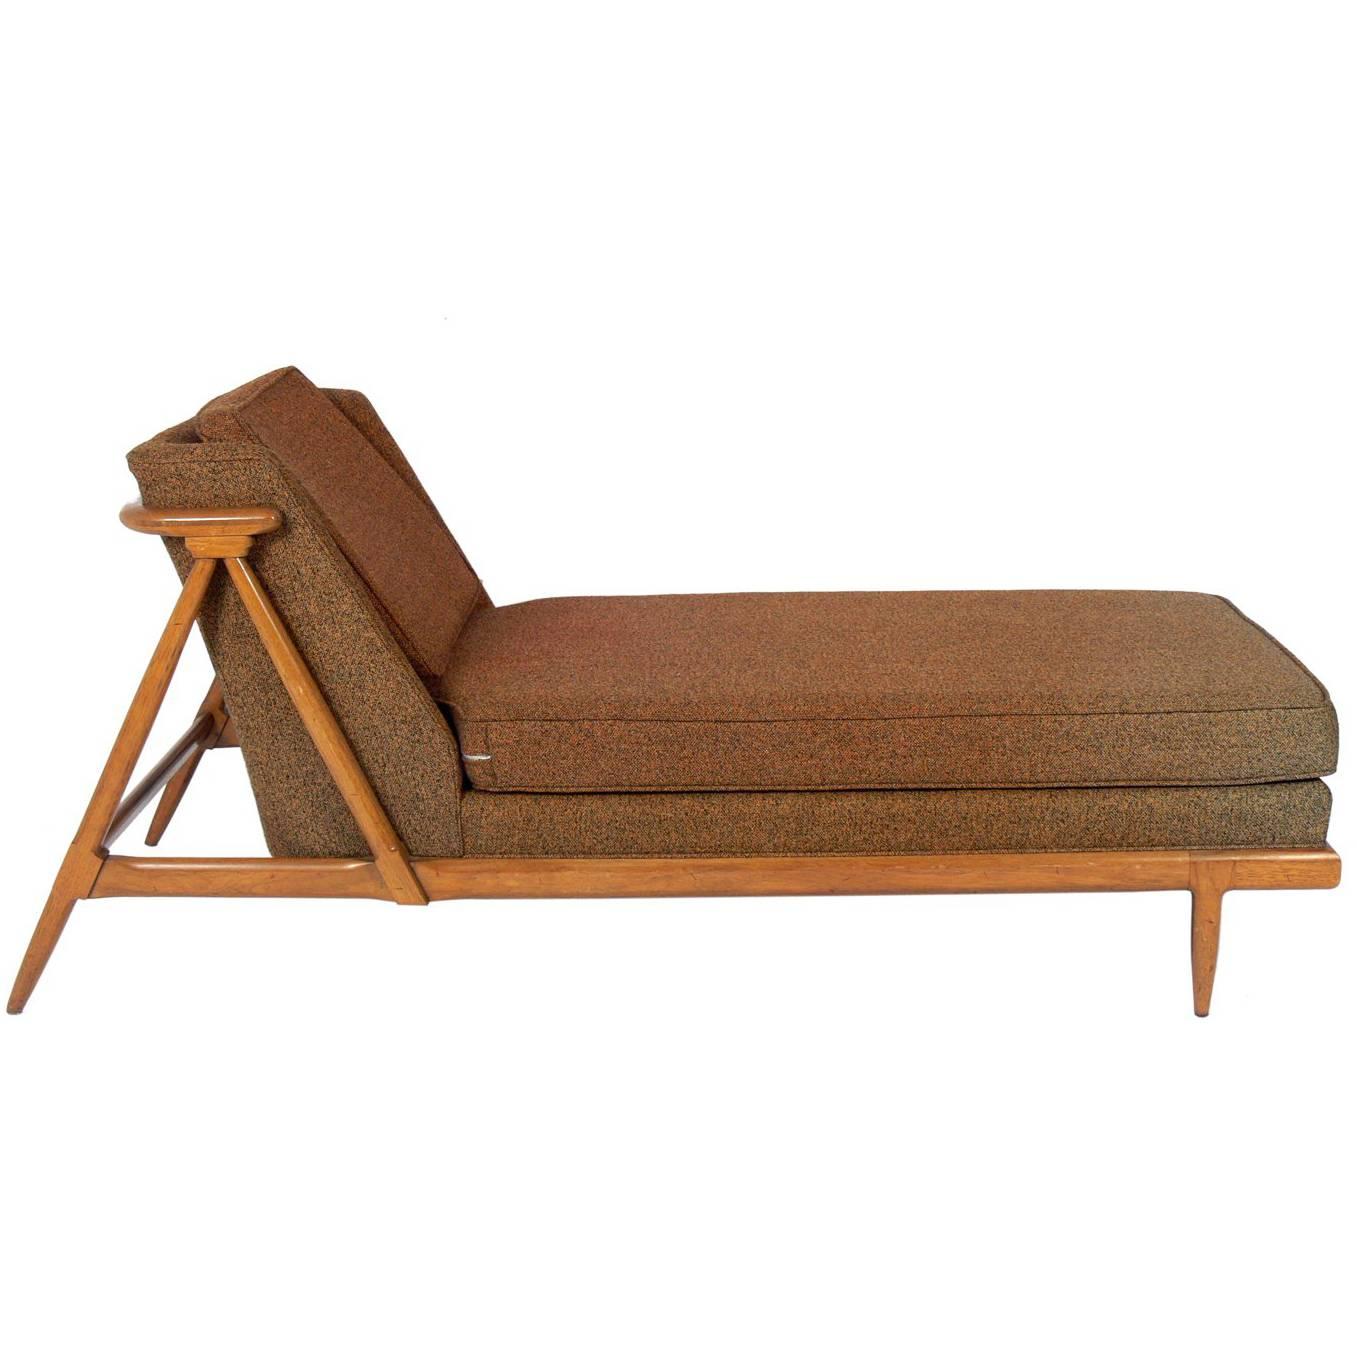 Curvaceous Chaise Lounge Designed by Lubberts and Mulder for Tomlinson